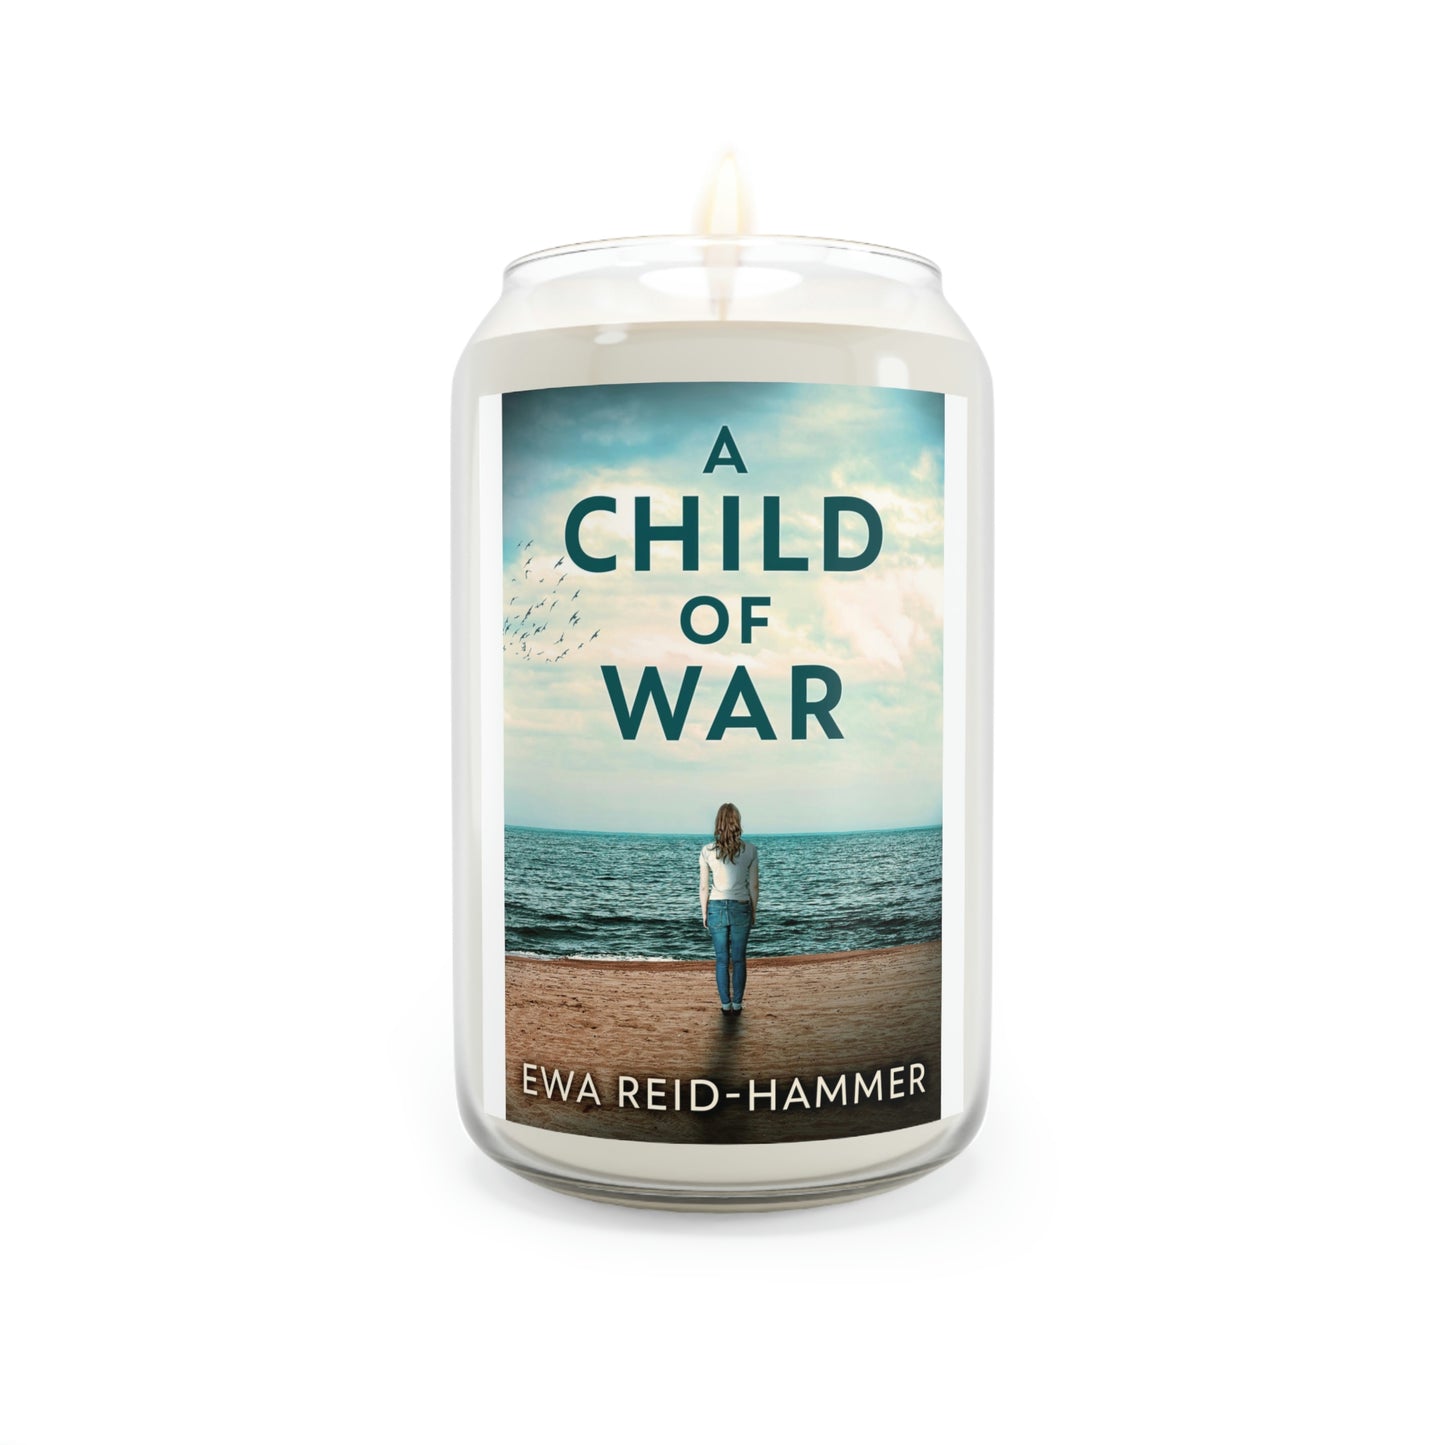 A Child Of War - Scented Candle